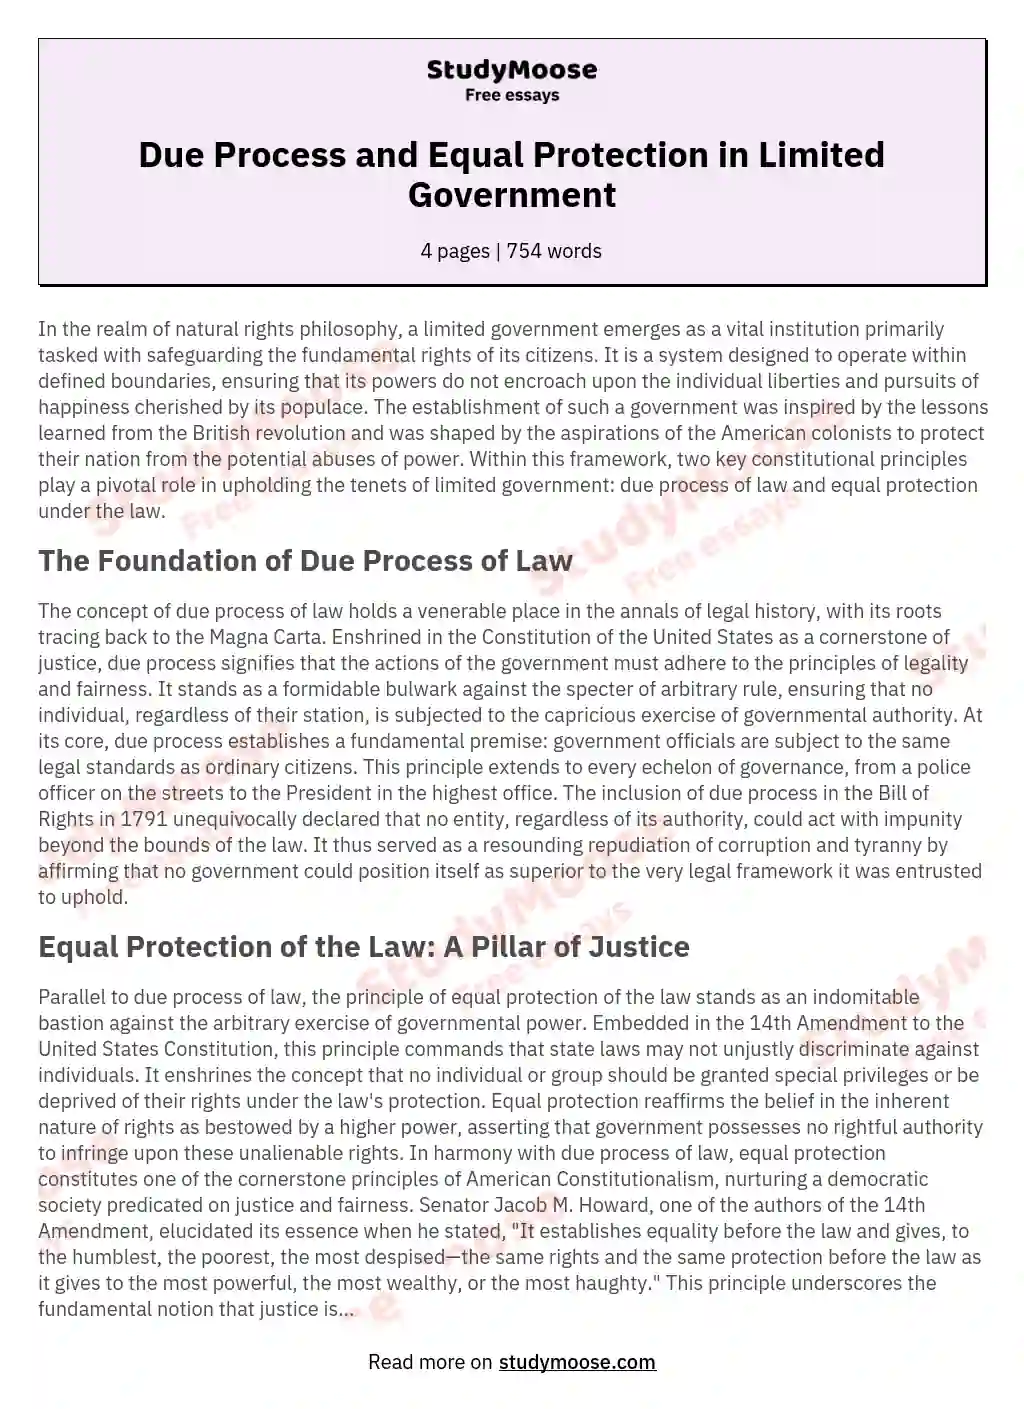 Equal protection and due process clauses